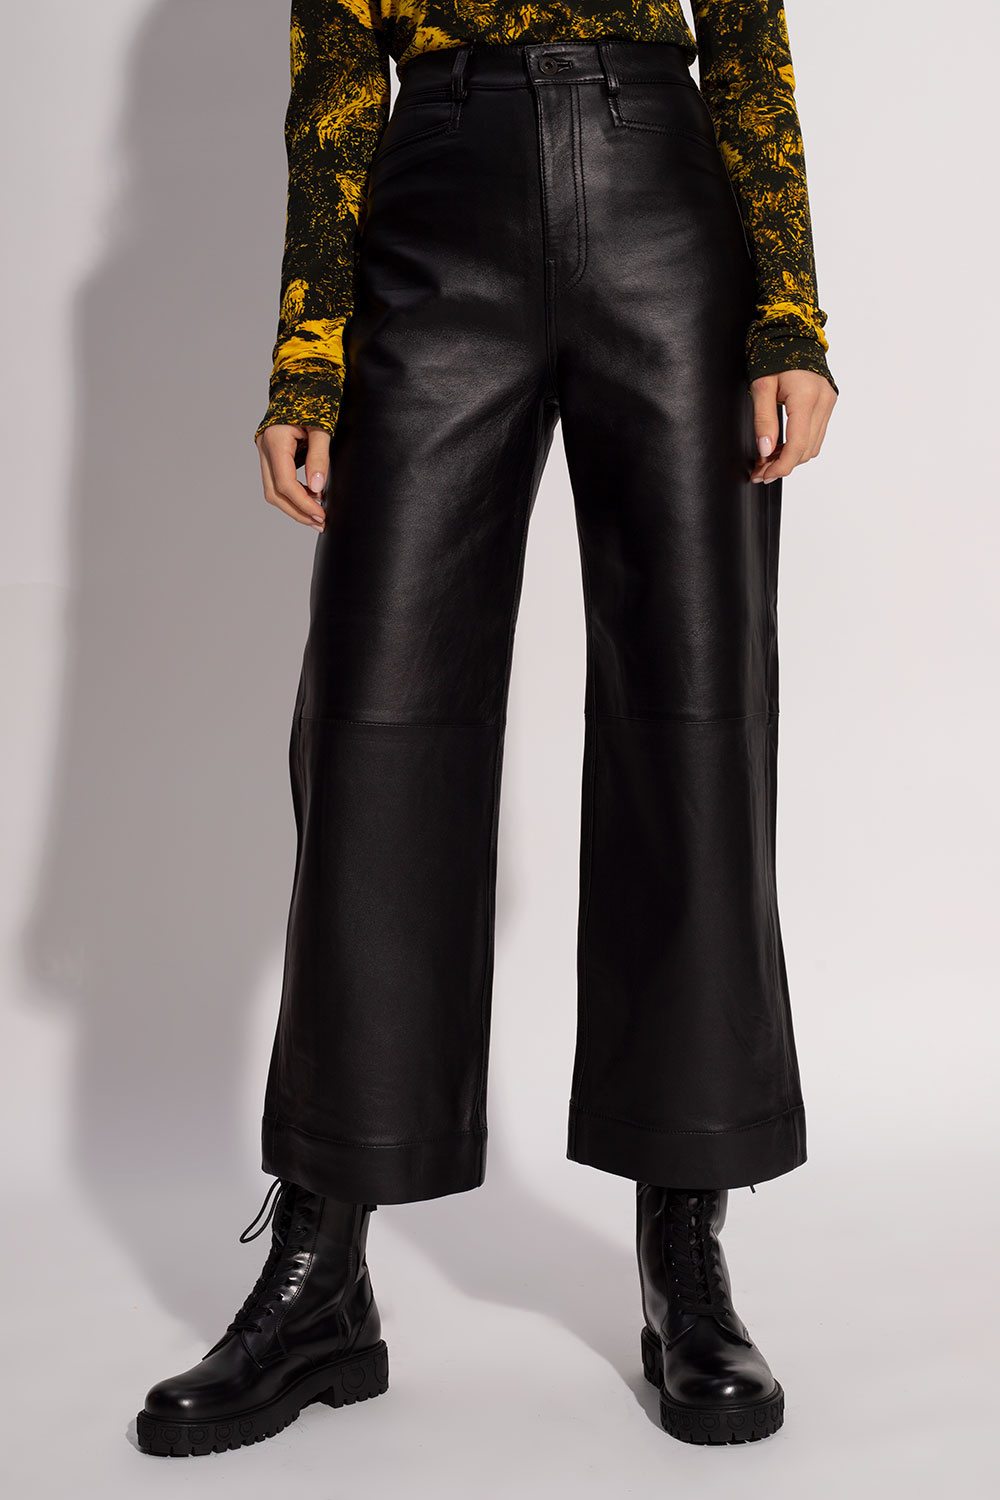 Proenza Schouler White Label Leather detail trousers with logo